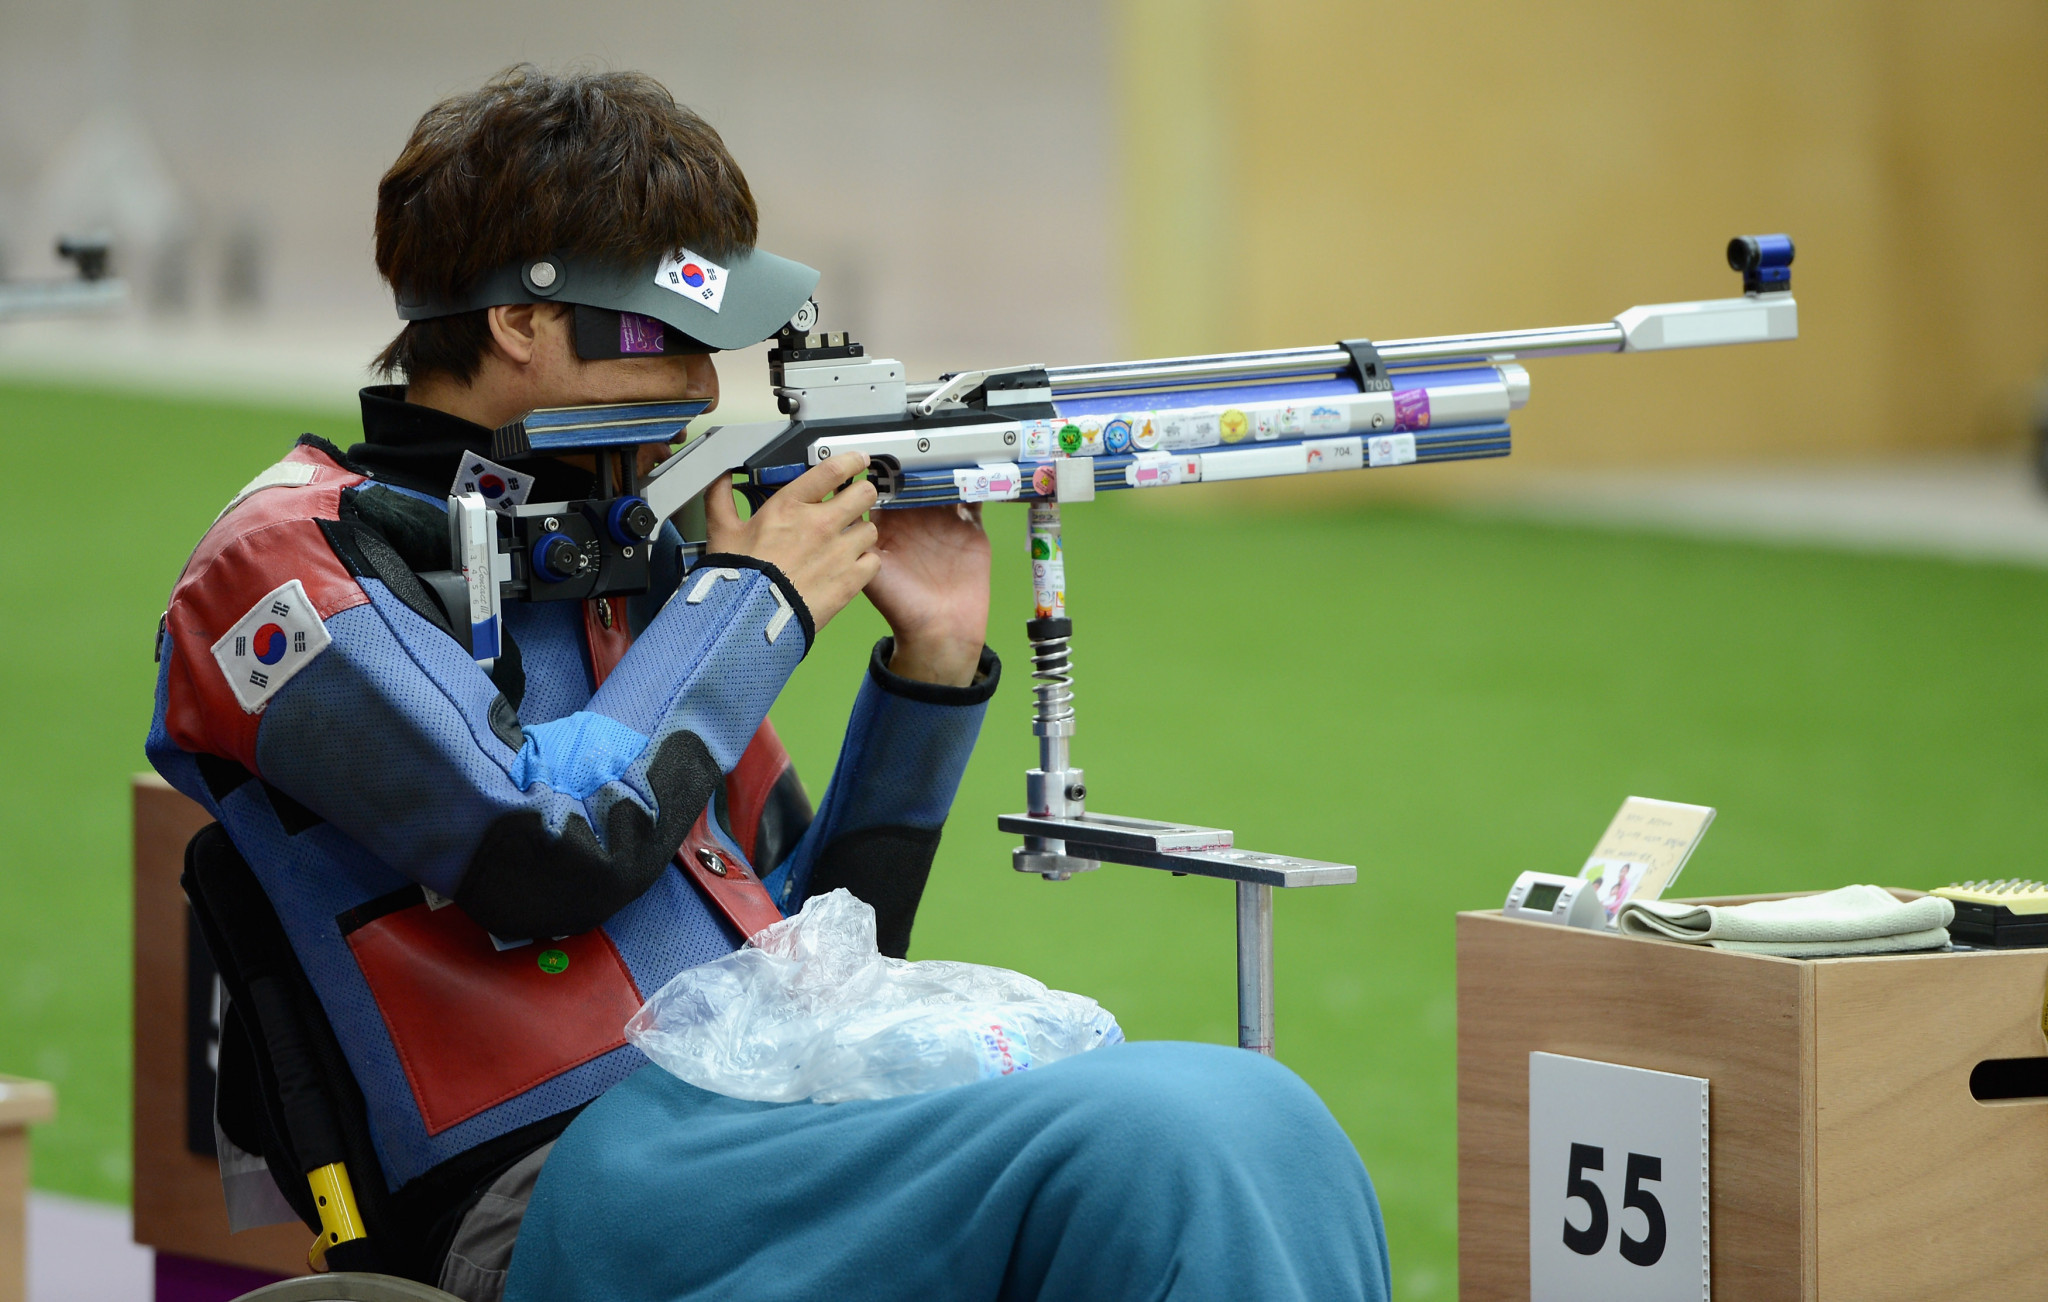 South Korea’s Jiseok Lee captured his first win of the World Shooting Para Sport World Cup season in Osijek ©Getty Images